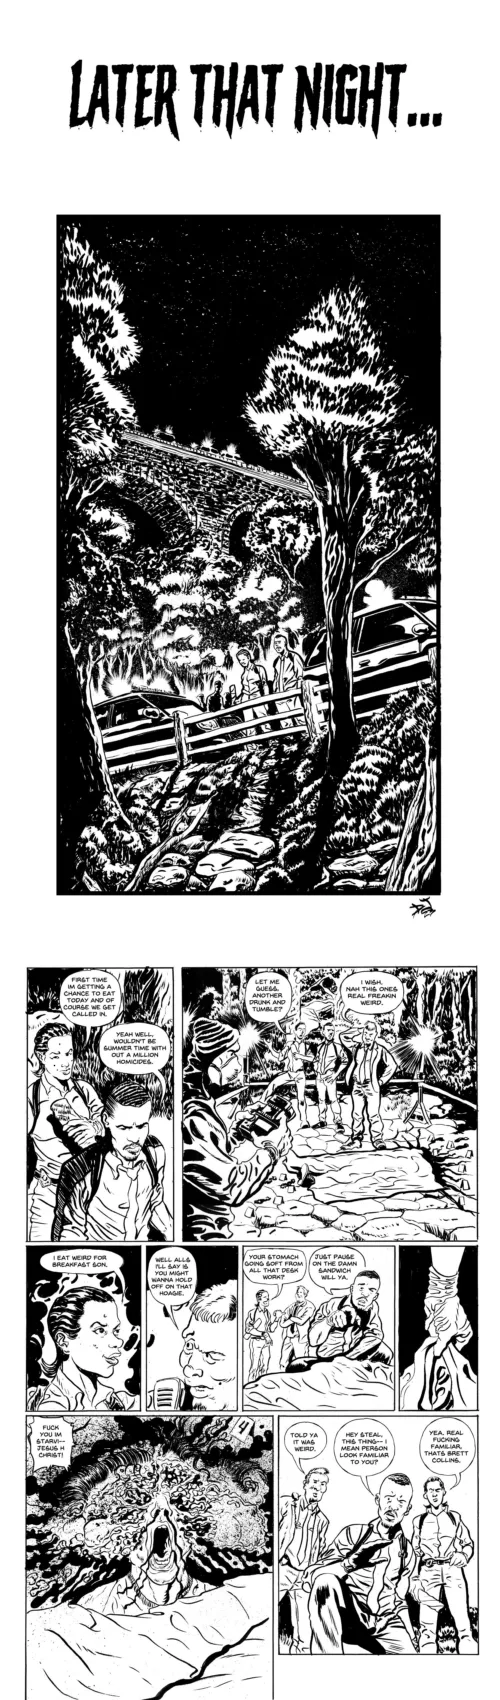 Page 2 In a 9-panel comic series by Derick Jones, titled Nose Bleed police investigate a strange and morbid crime scene. By the end the investigators determine the identity of the victim.